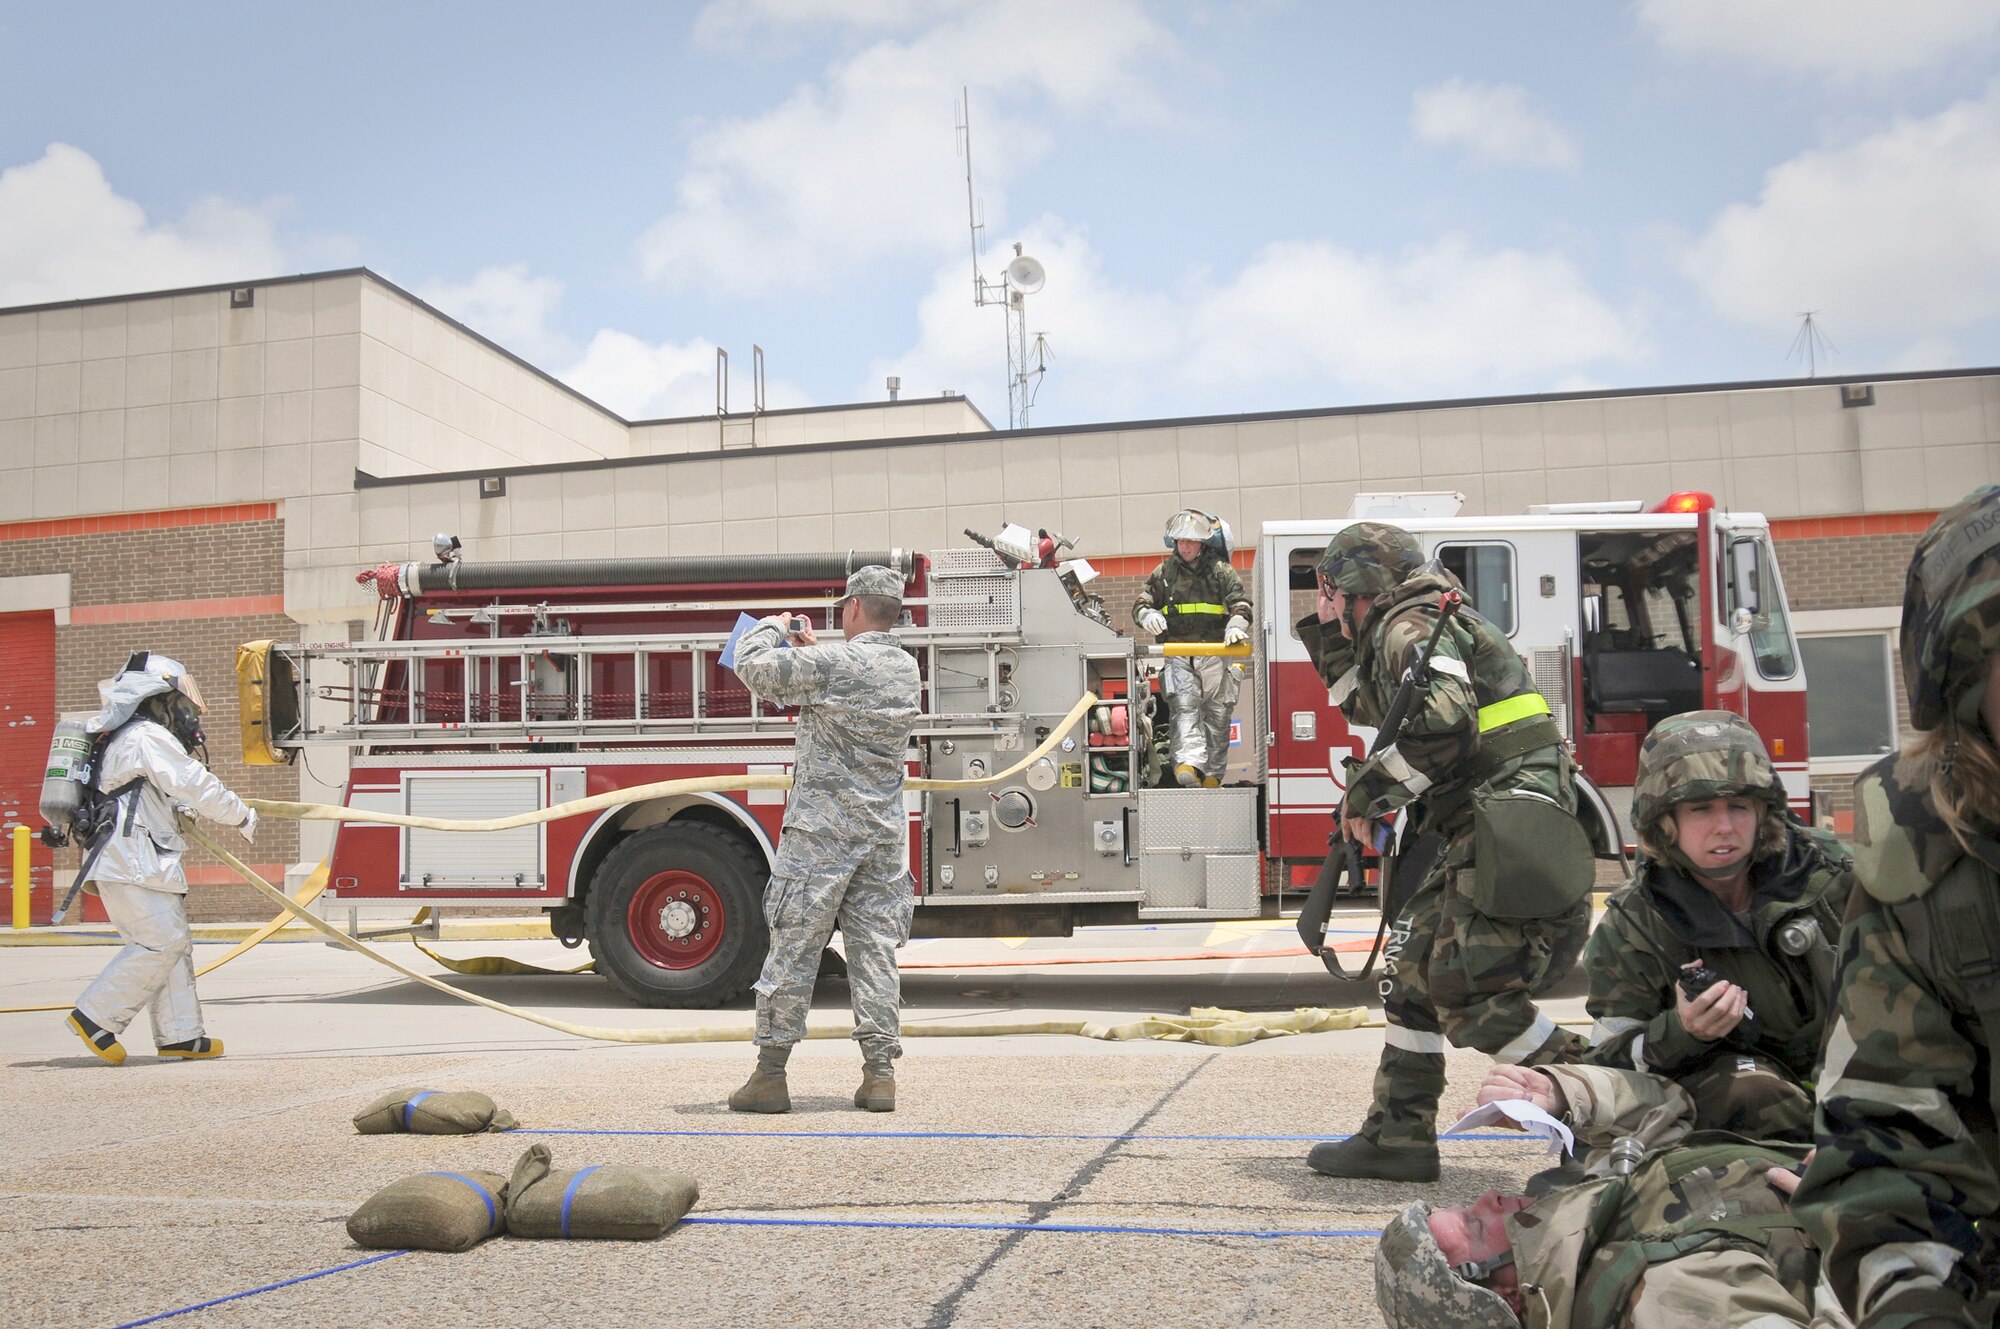 Members of the 123rd Airlift Wing fire department respond to a simulated fire during an operational readiness inspection May 20, 2010, at the Gulfport Combat Readiness Training Center in Gulfport, Miss. (U.S. Air Force photo/Tech. Sgt. Dennis Flora)